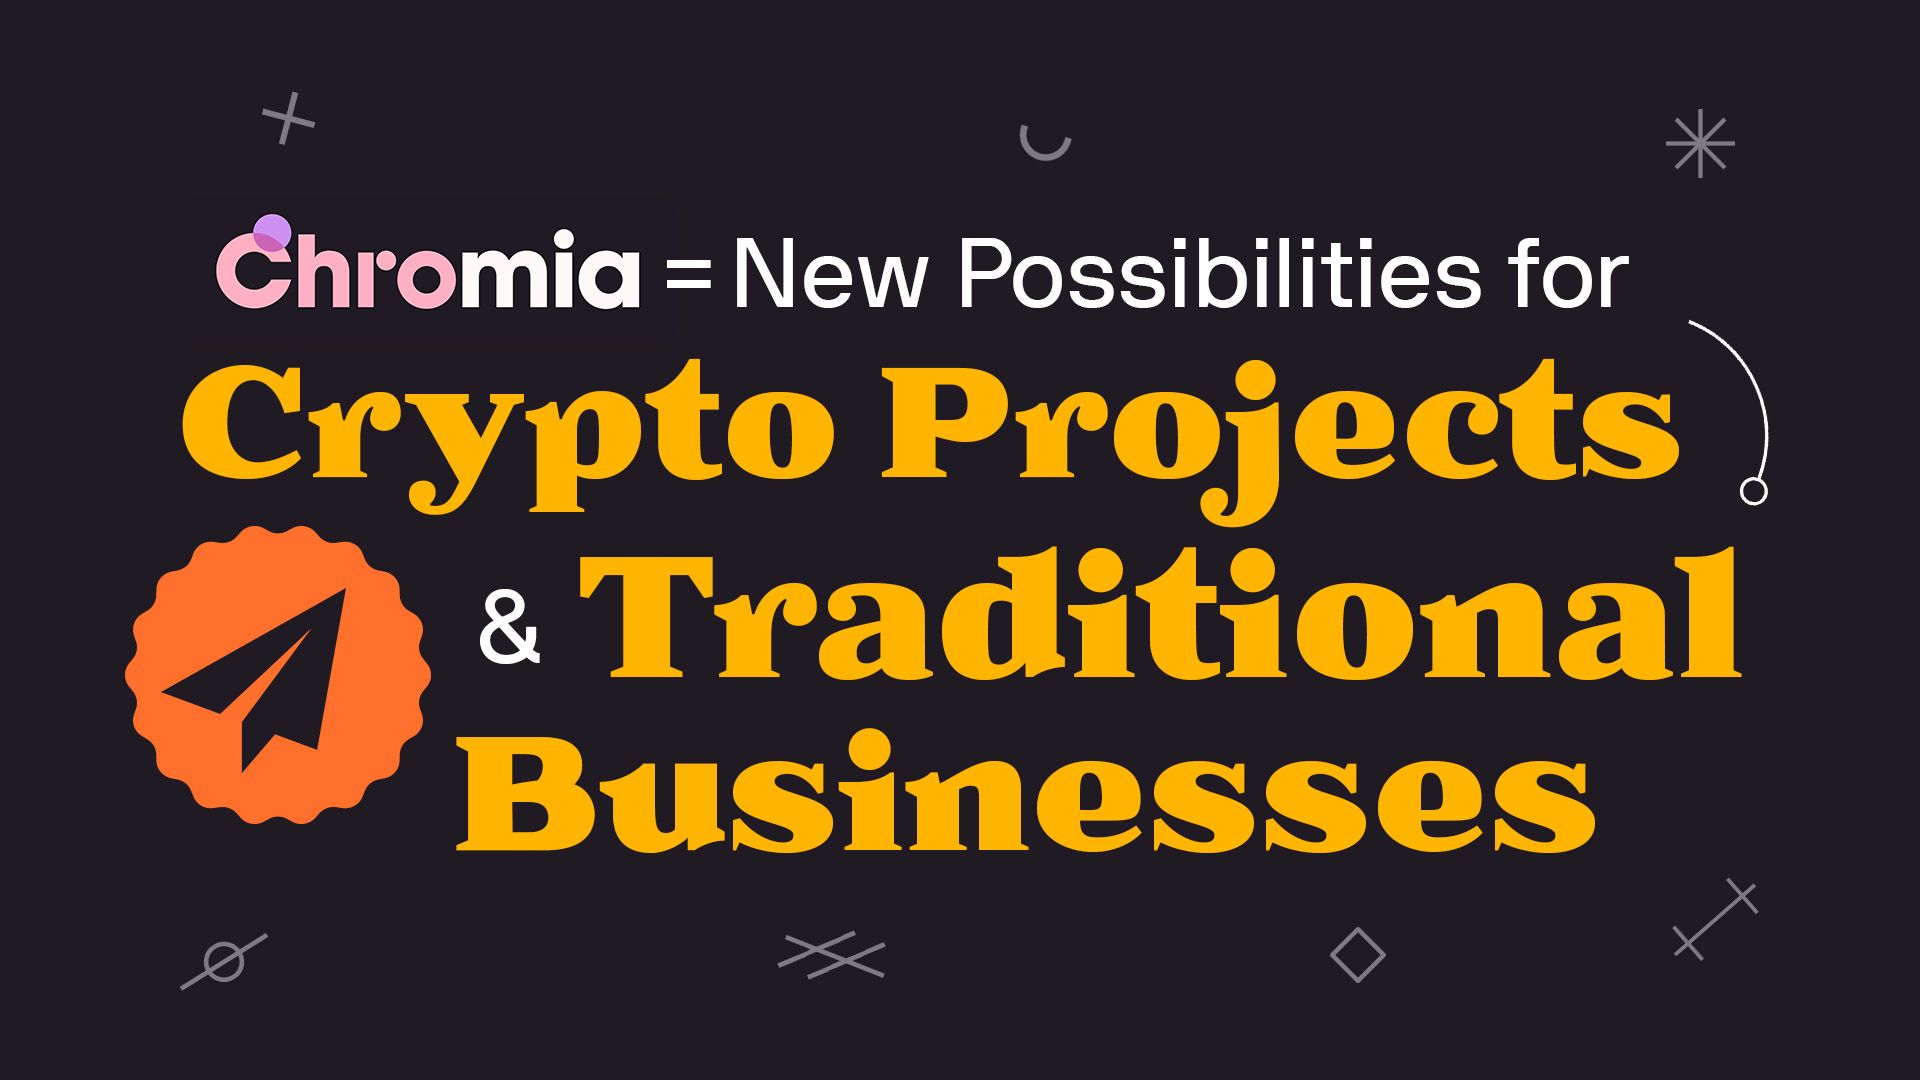 Chromia = New Possibilities for Crypto Projects and Traditional Businesses